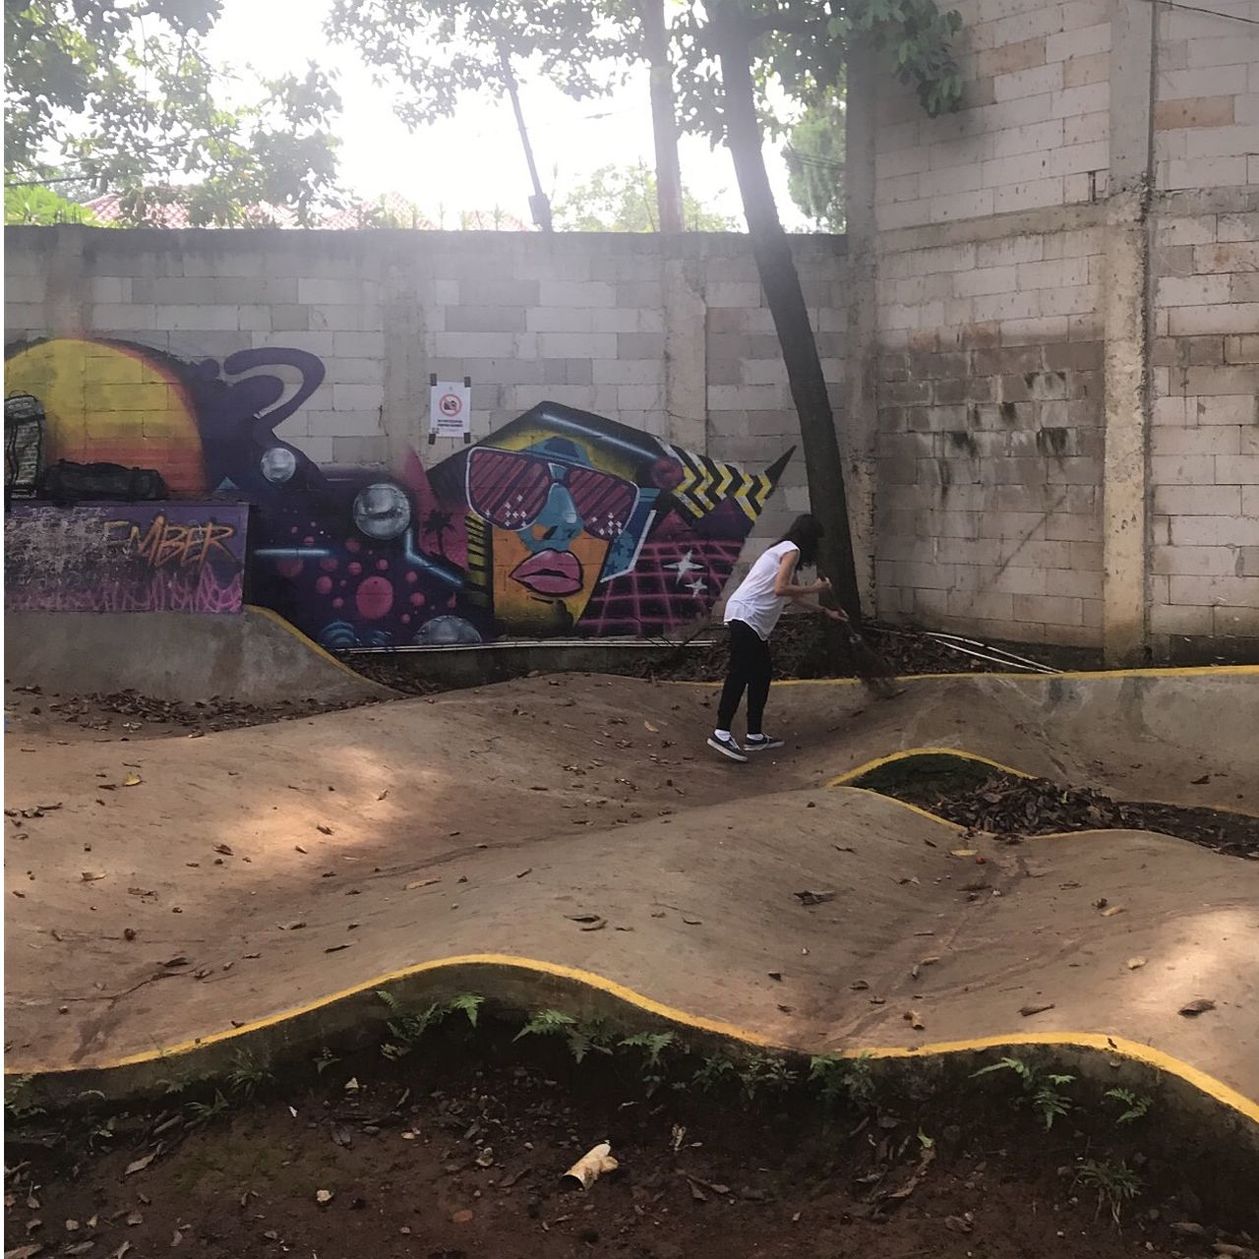 graffiti, real people, full length, built structure, architecture, one person, day, lifestyles, outdoors, building exterior, standing, tree, men, skateboard park, people